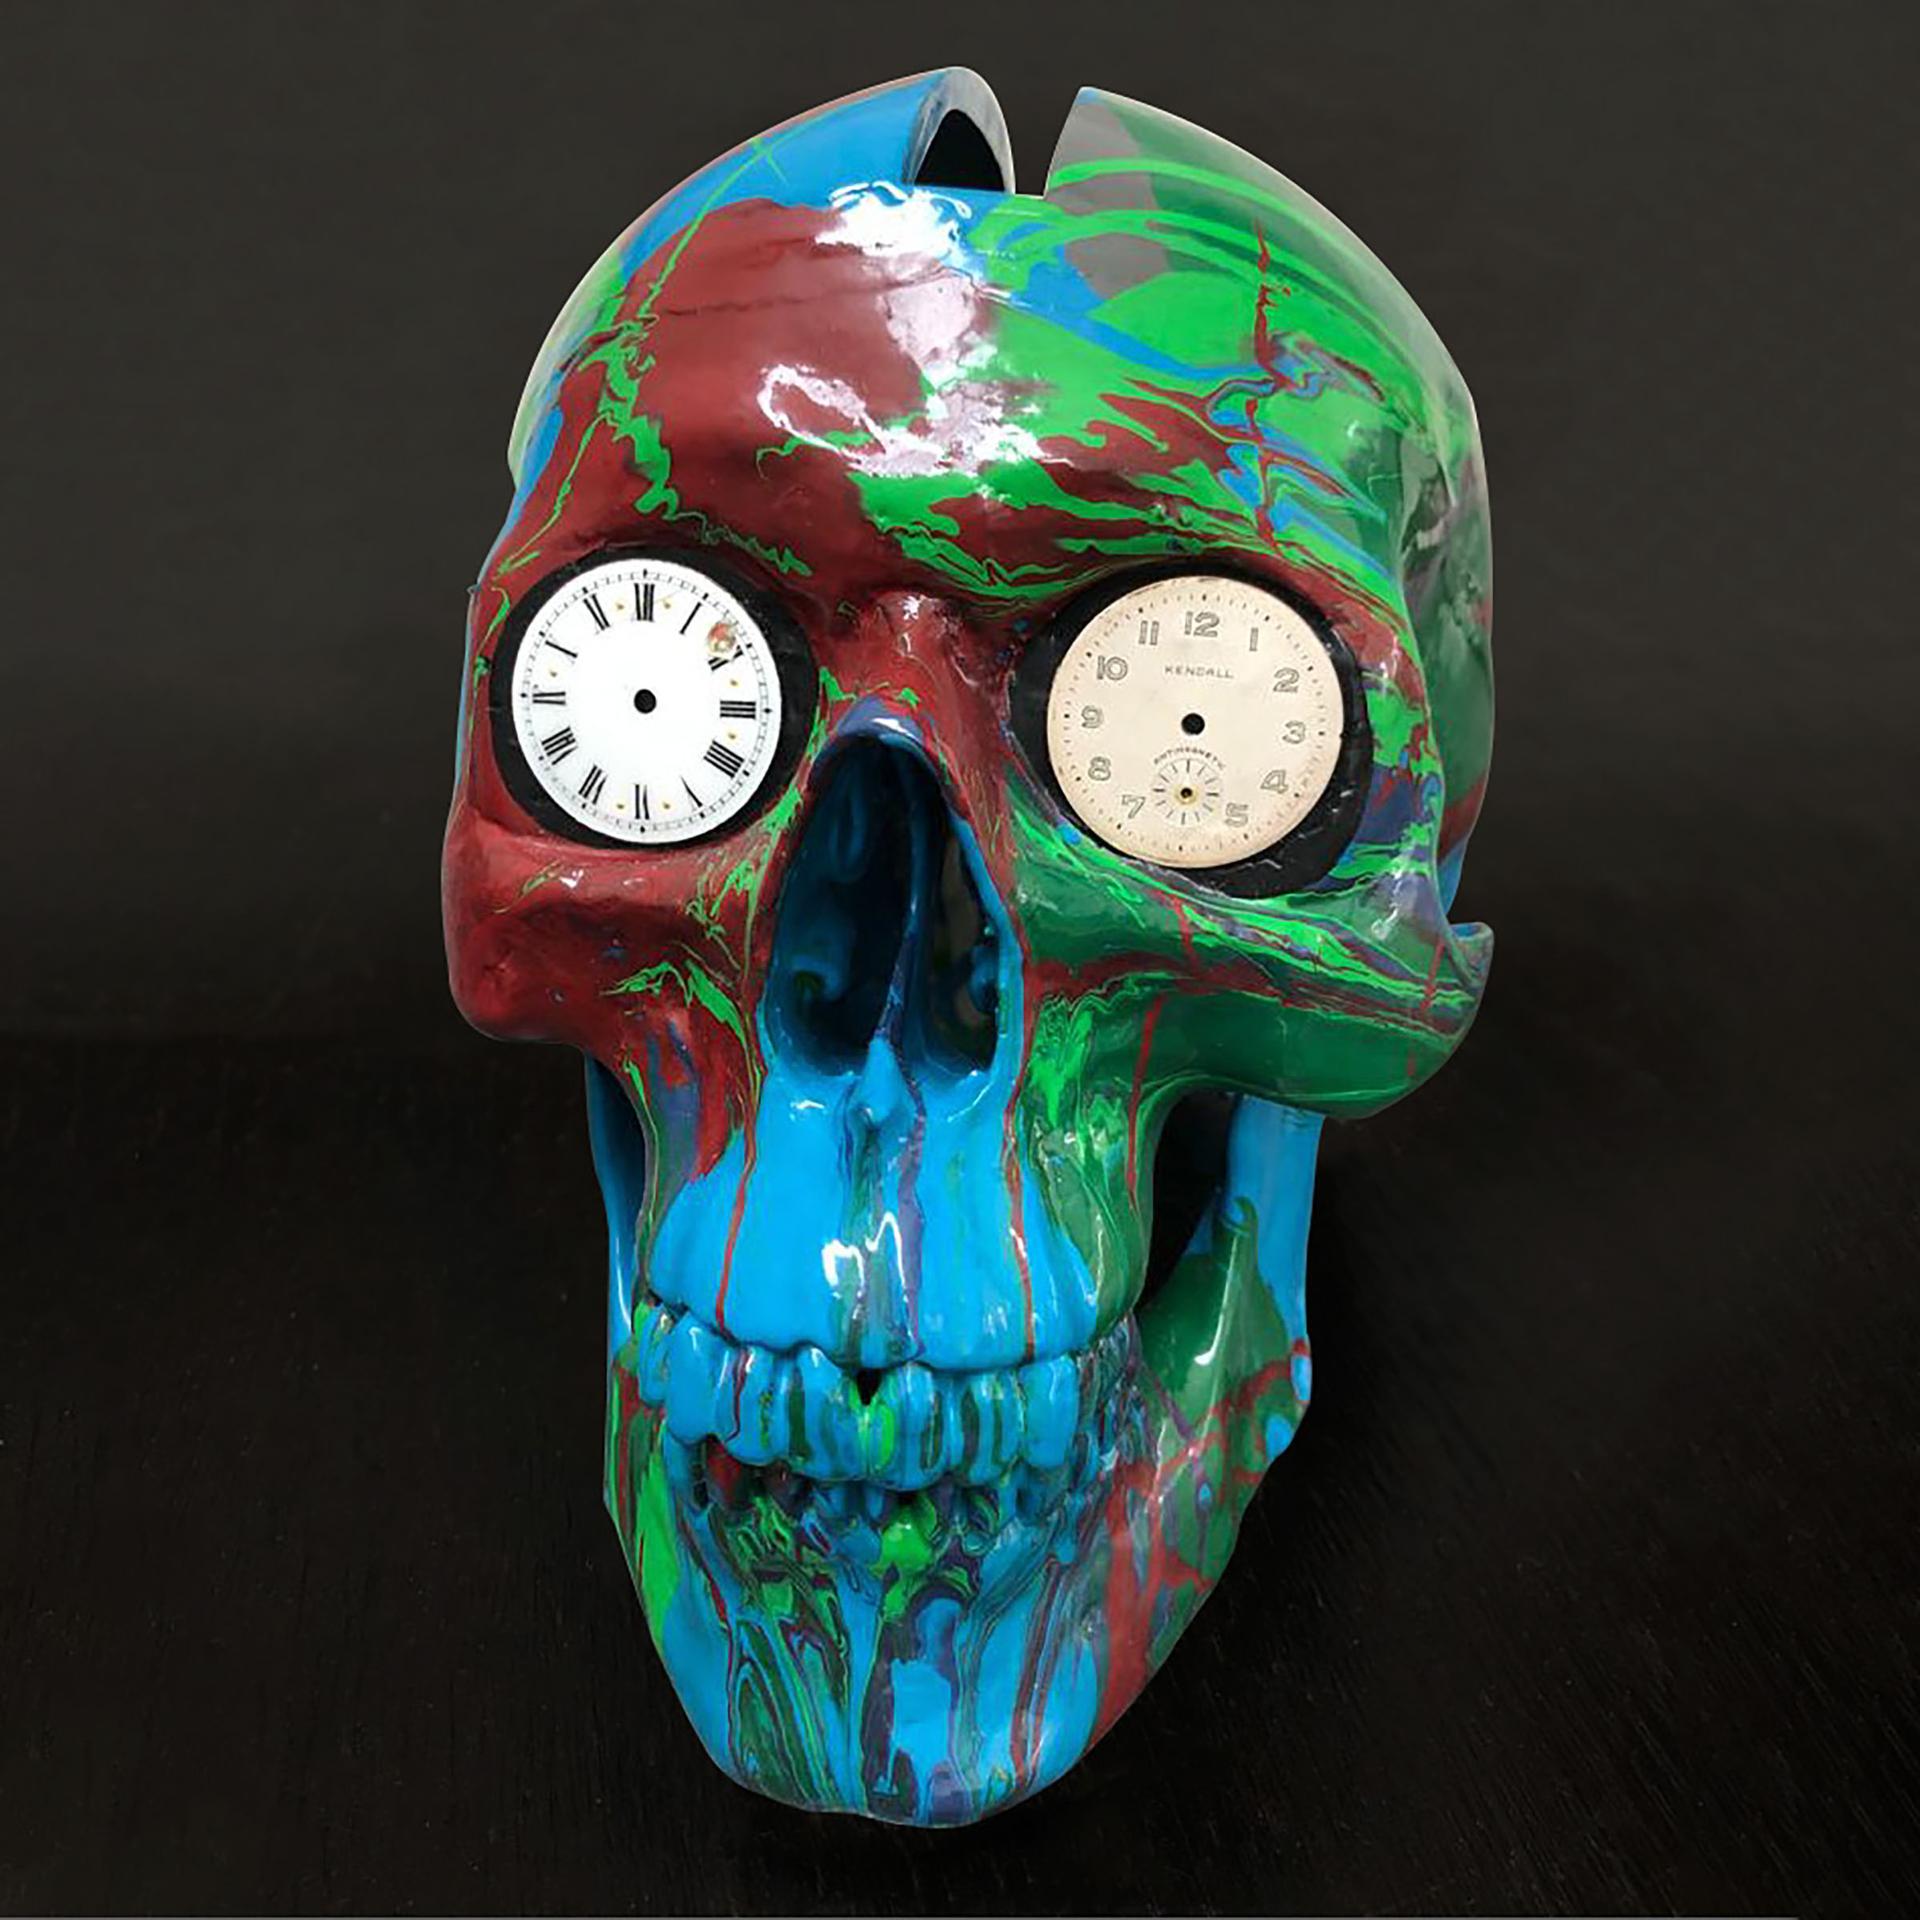 Damien Hirst (1965) - The Hours Spin Skull, 2009